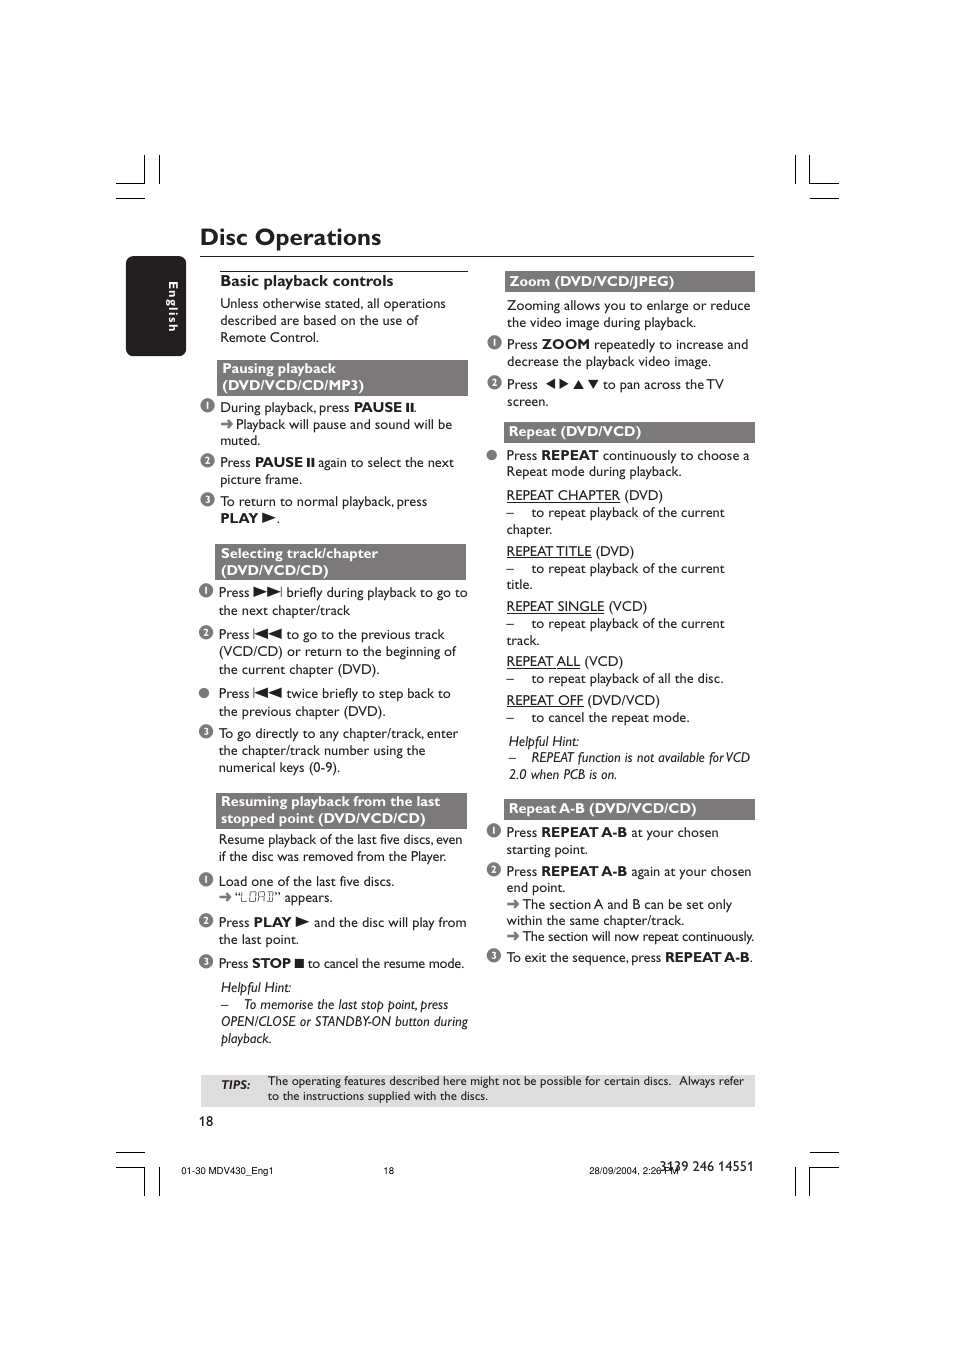 Disc operations | Philips Magnavox MDV430 User Manual | Page 18 / 30